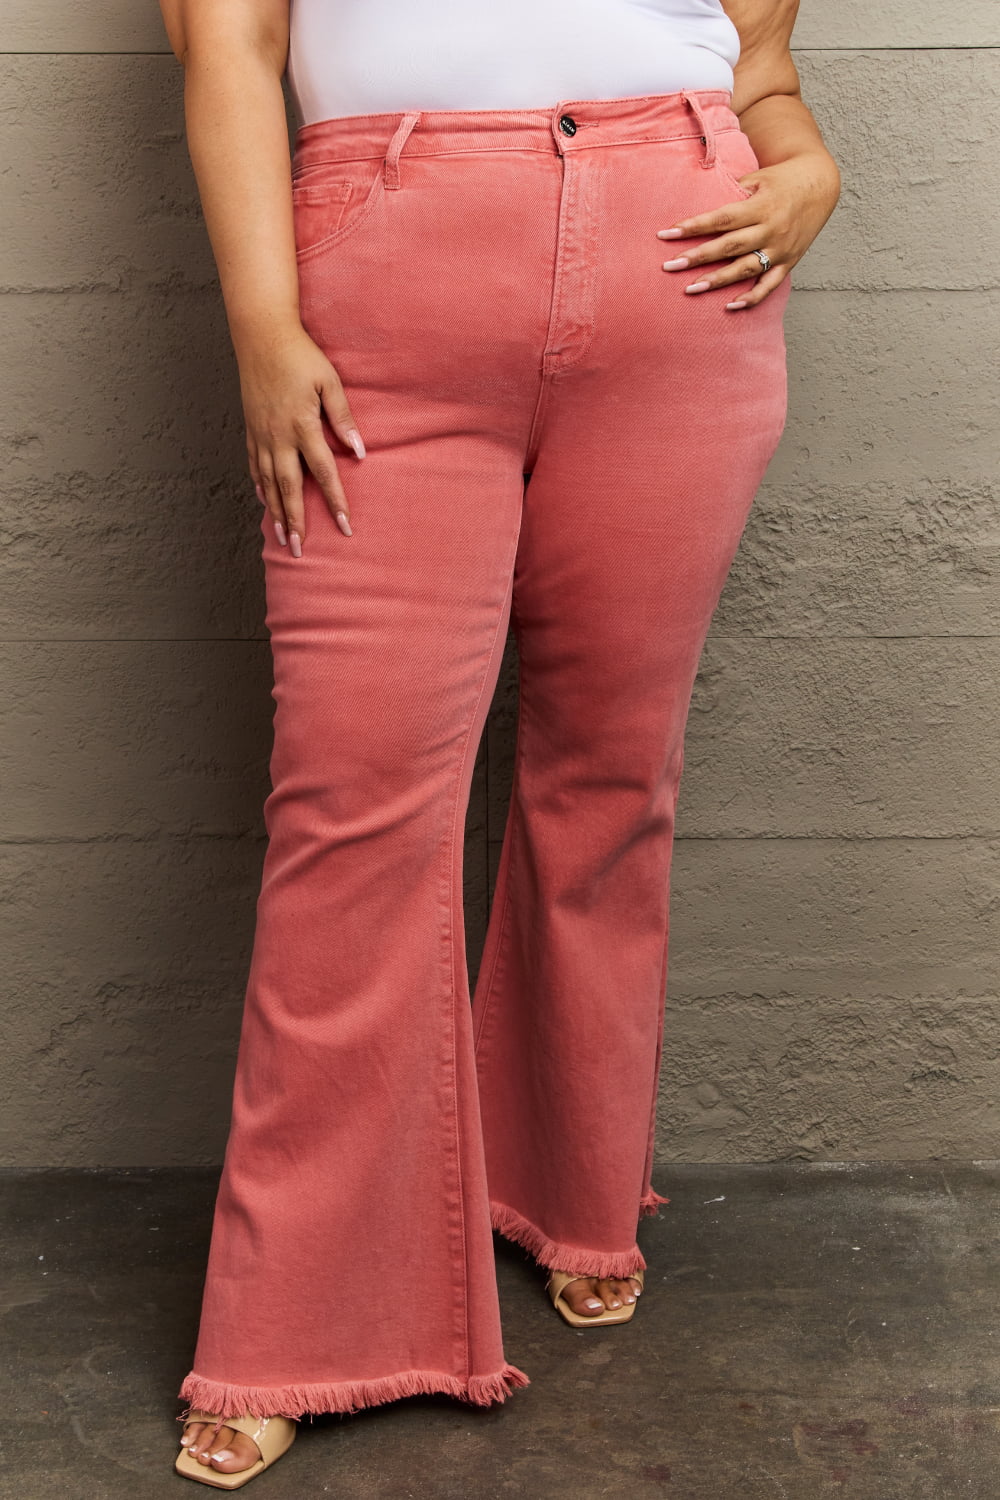 RISEN Bailey Full Size High Waist Side Slit Flare Jeans - Sizes 0-15 & 1X-3X Ti Amo I love you